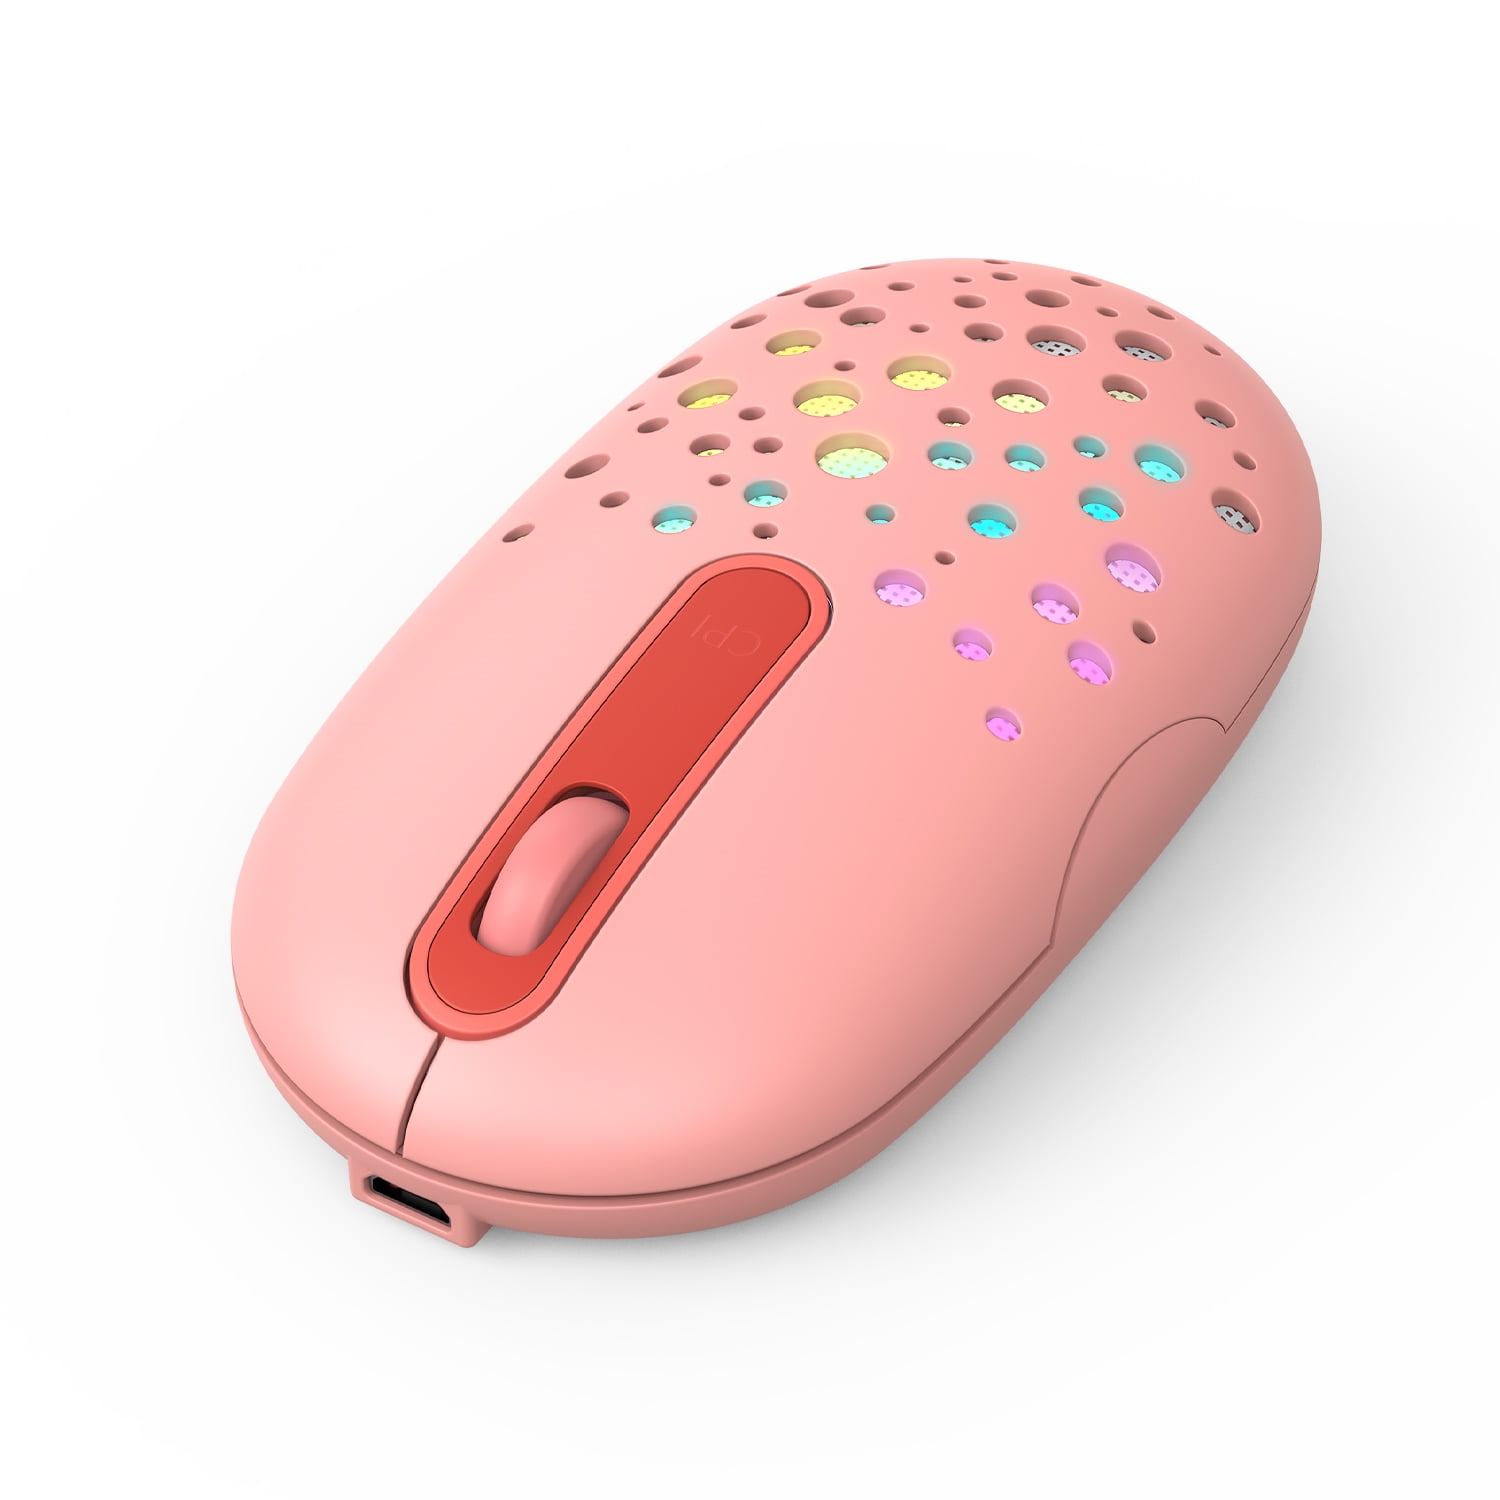 Wireless Mouse Cute Pink Pigs On Print Pattern Children. 2.4G Portable Optical Mouse with Nano USB Receiver for Kids